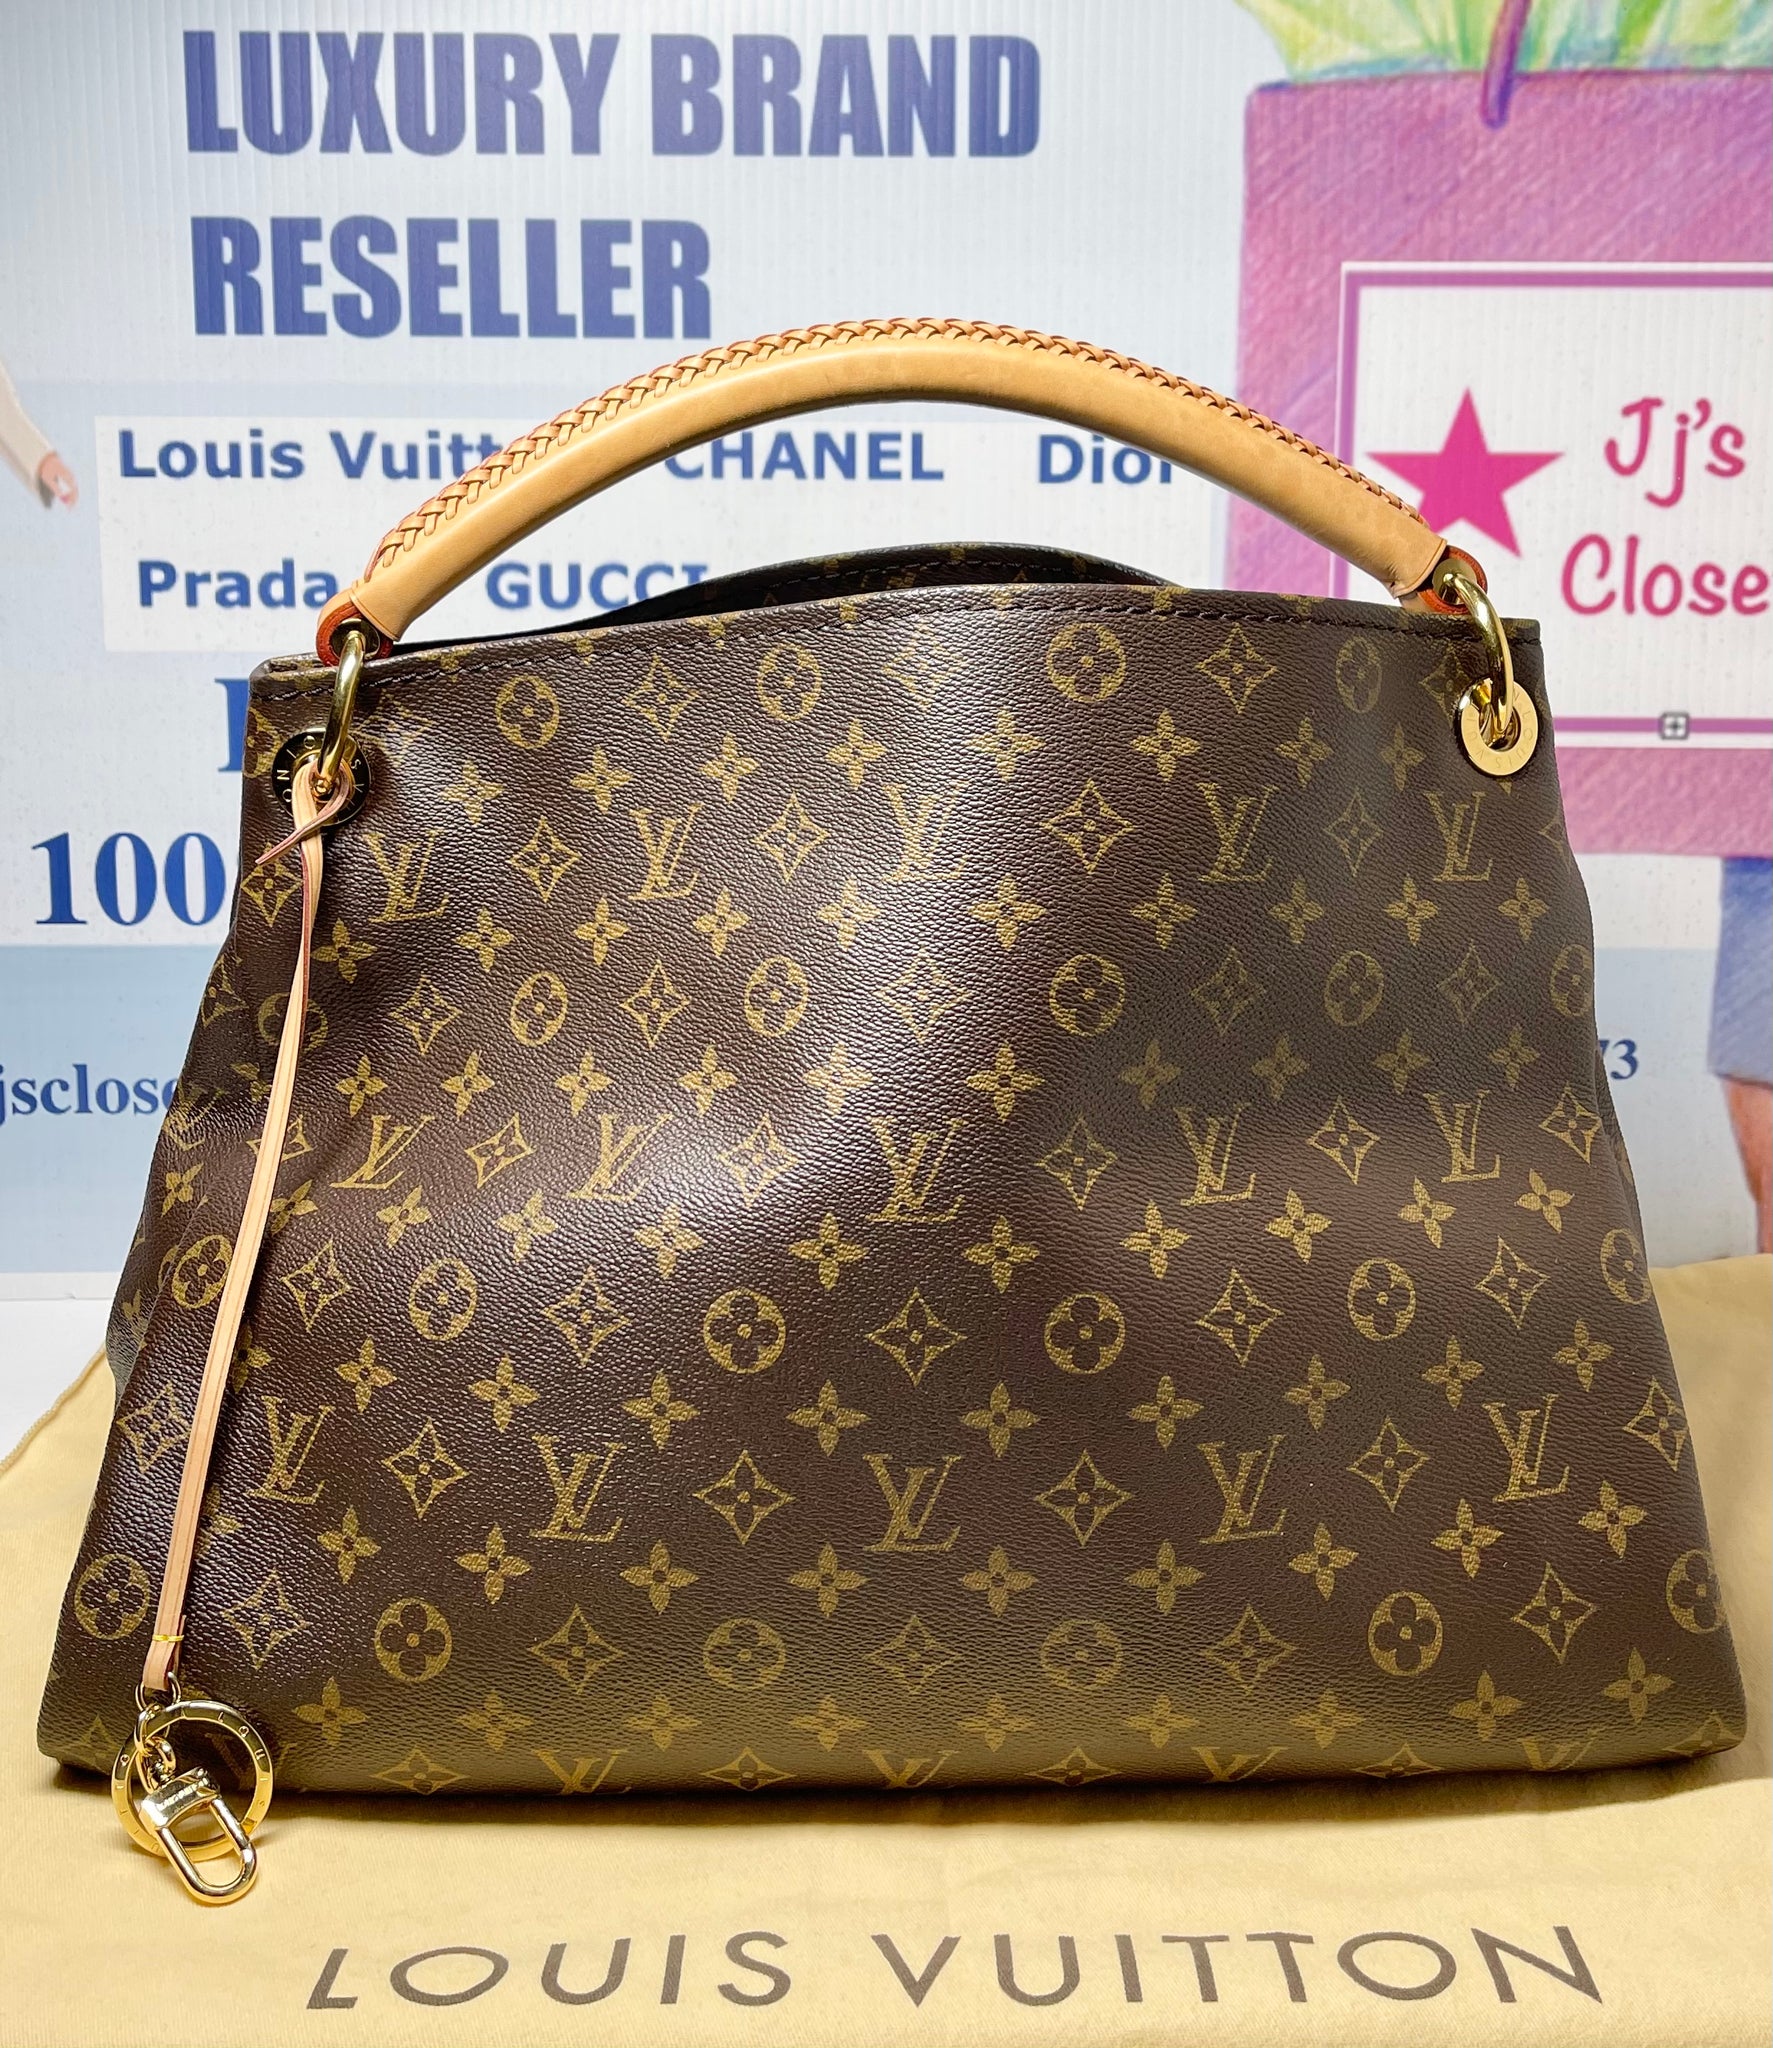 Louis Vuitton - Authenticated Artsy Handbag - Cloth Brown for Women, Very Good Condition